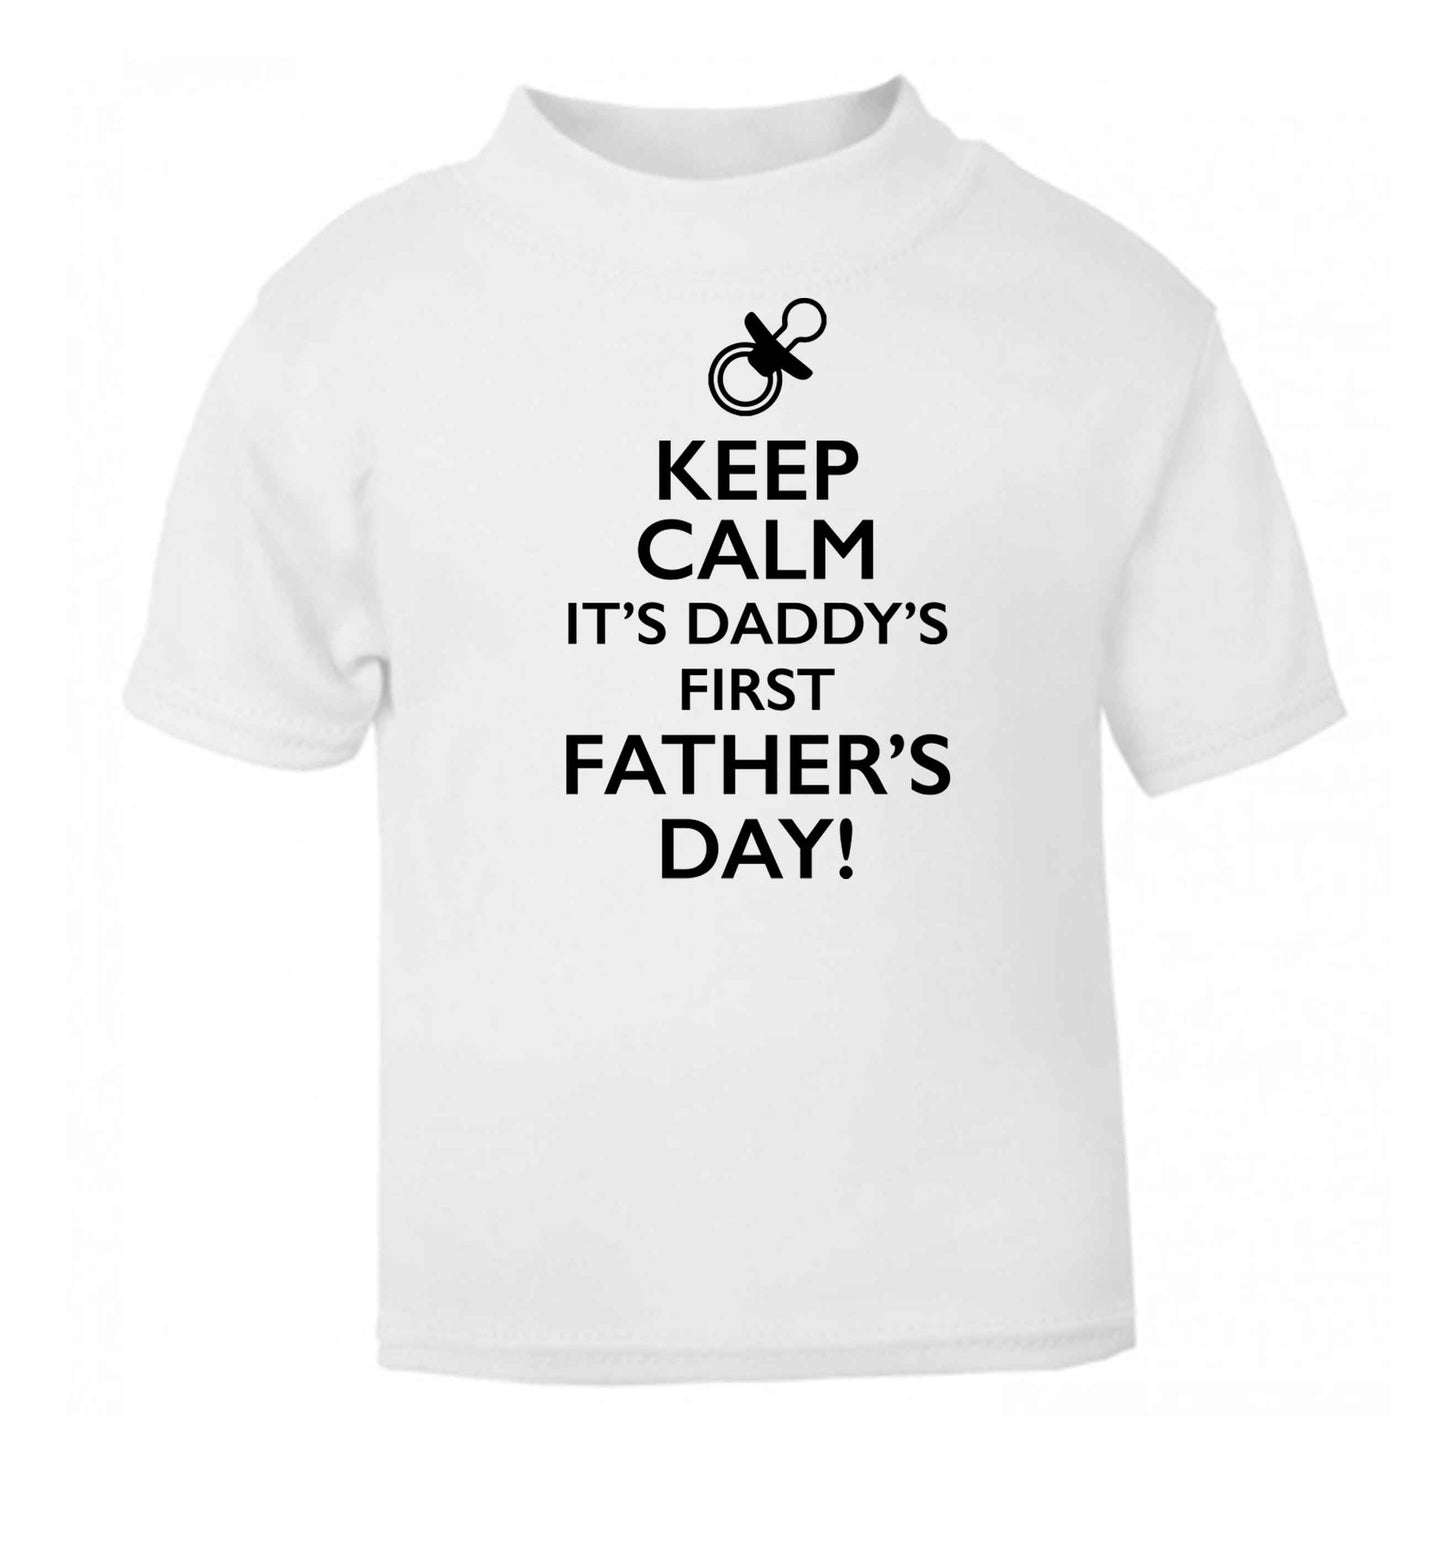 Keep calm it's daddys first father's day white baby toddler Tshirt 2 Years